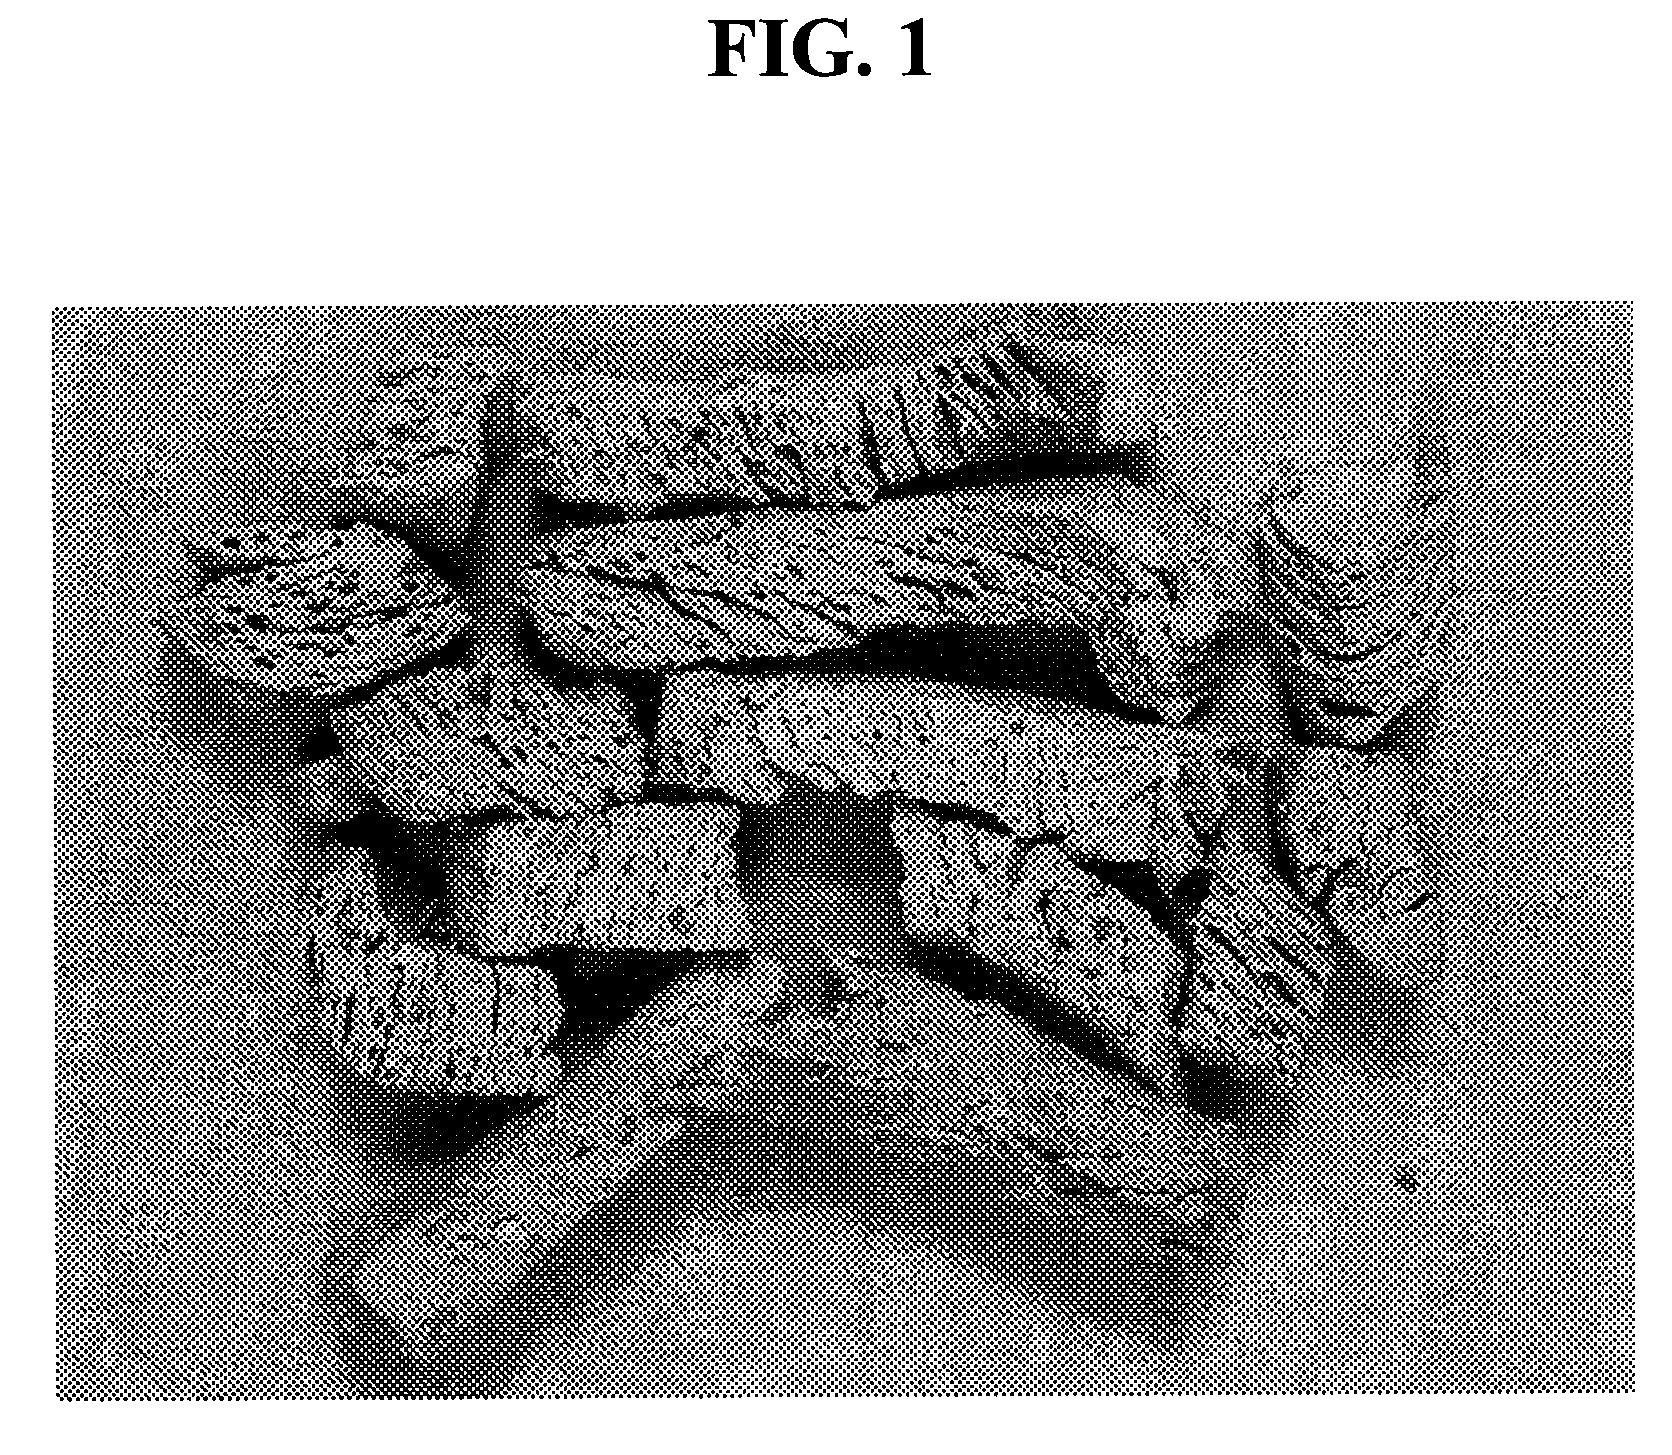 Meat emulsion products and methods of making same